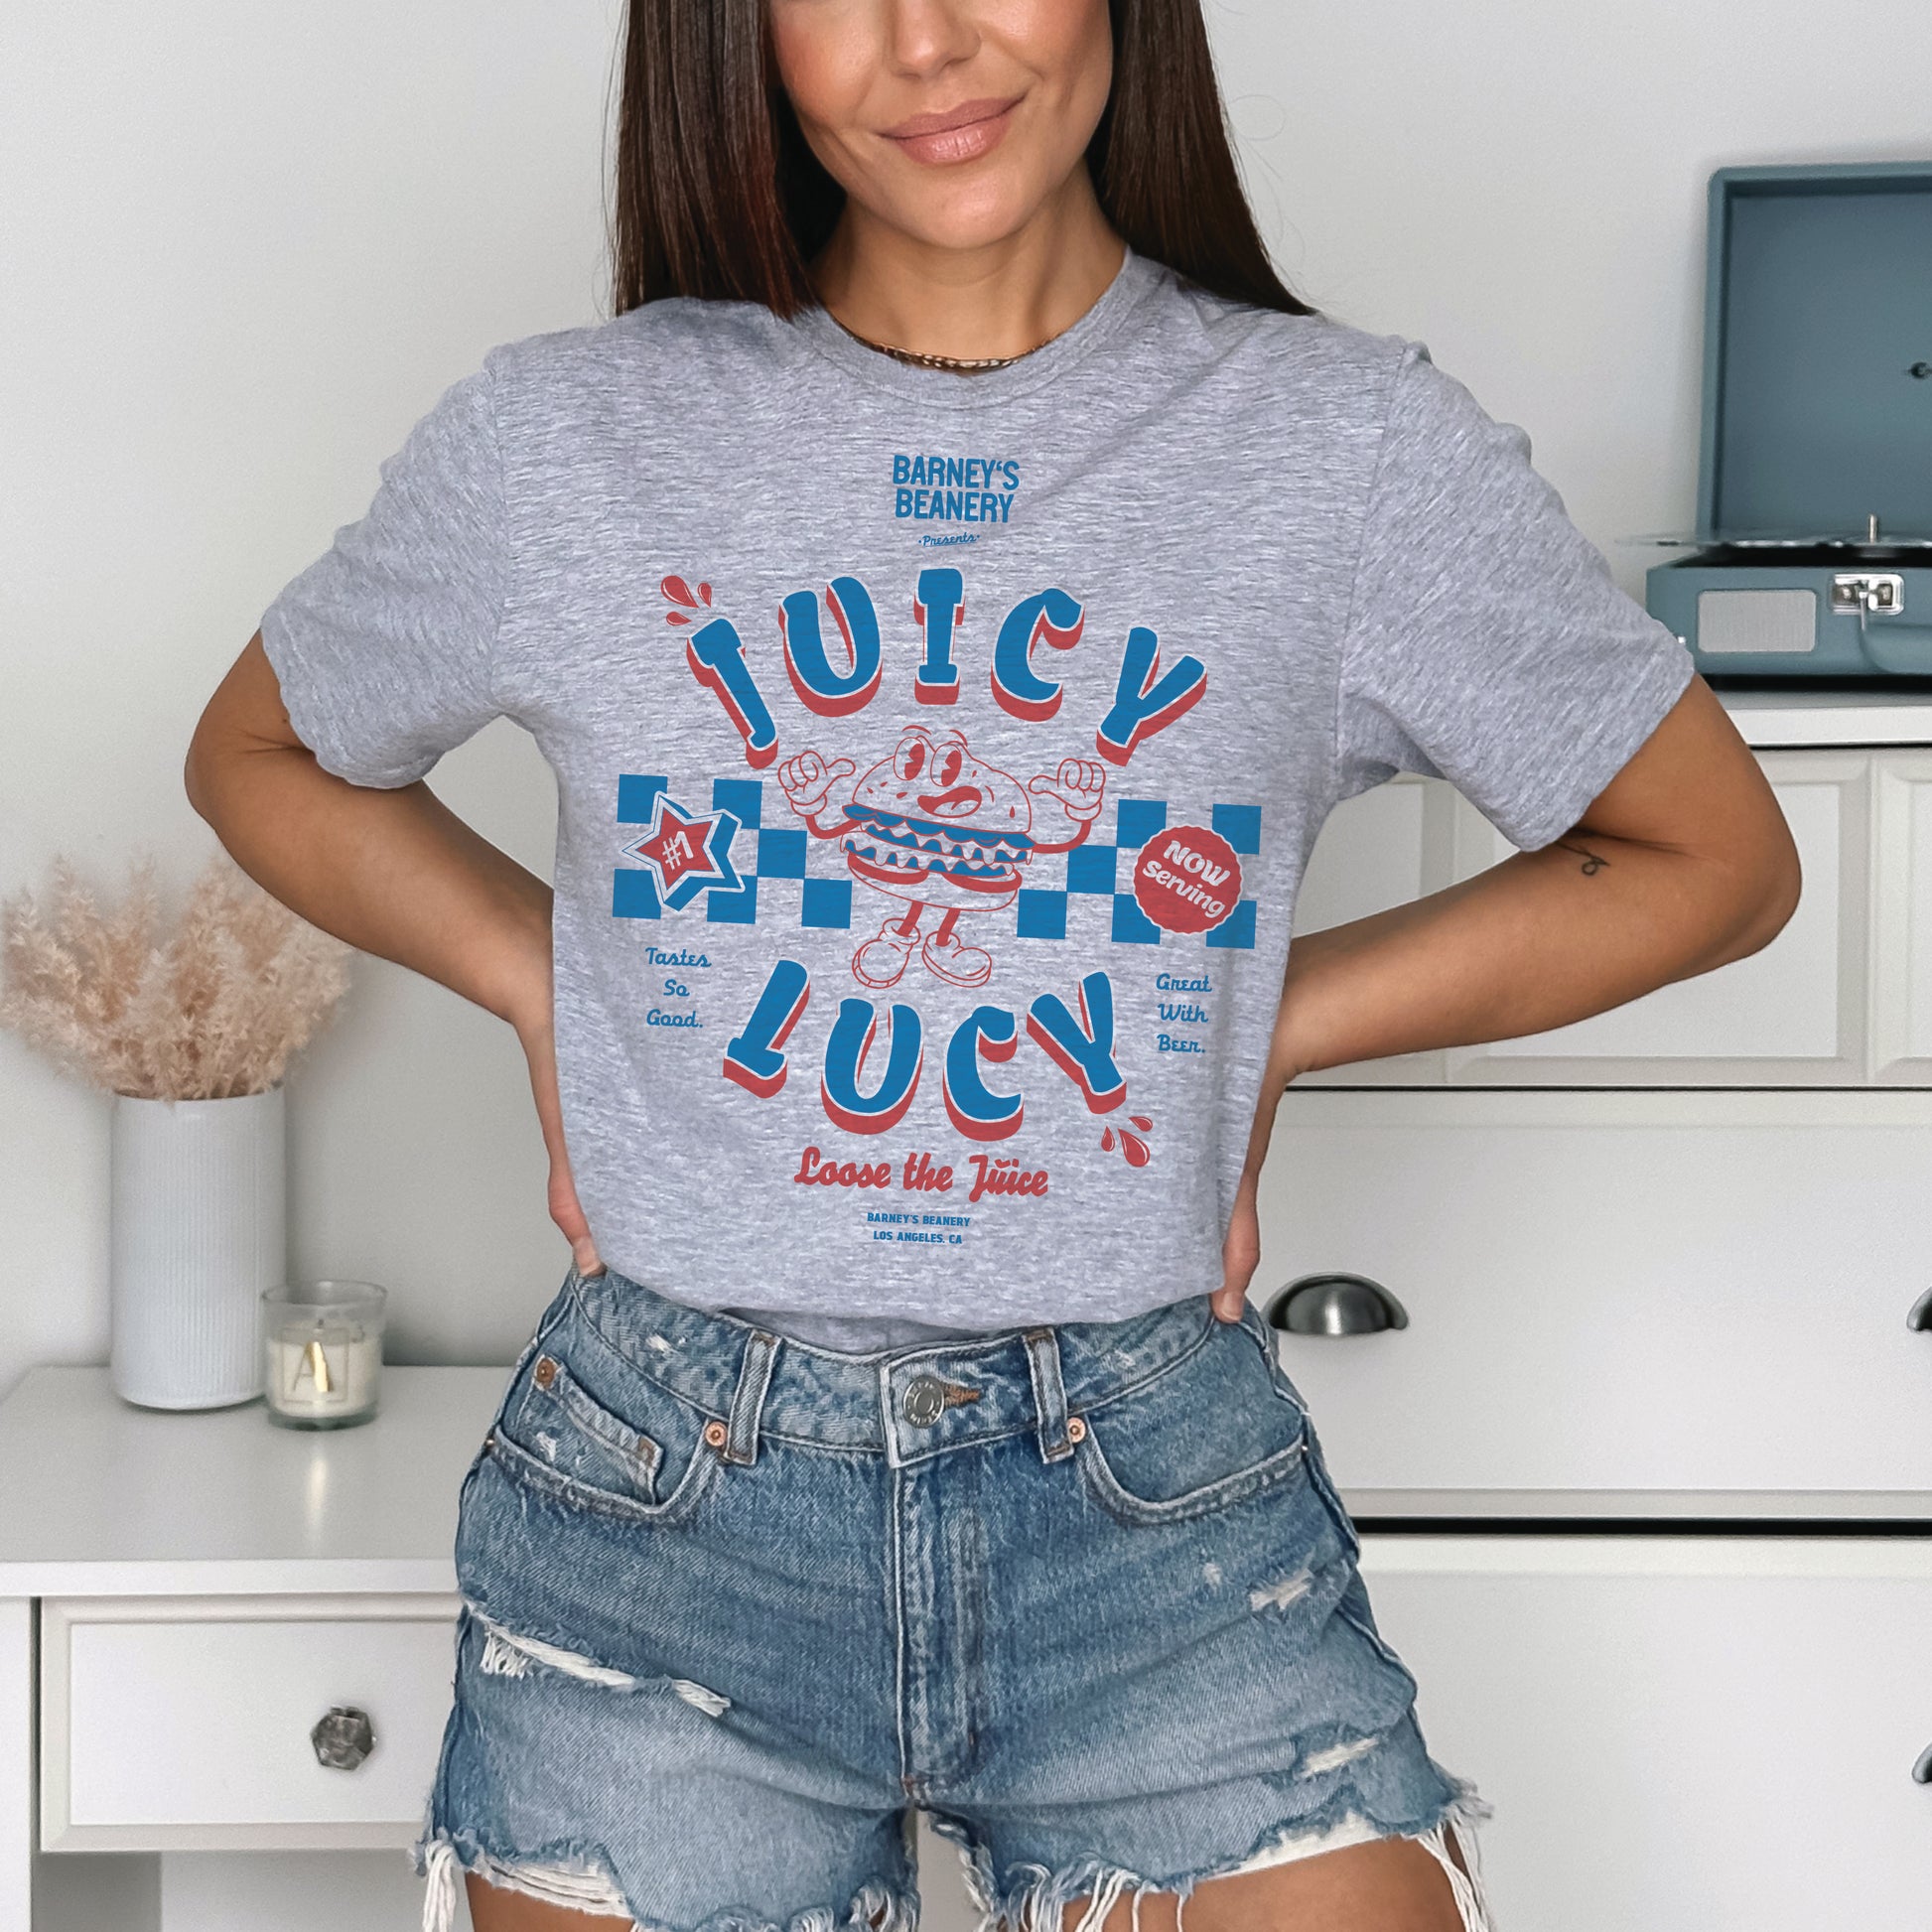 JUICY LUCY - Loose The Juice | BARNEY'S BEANERY - Women's Retro Graphic Tee | Sport Grey Gildan 5000 T-Shirt - Big Red & Blue Graphic On Front View Of Female Lifestyle Image